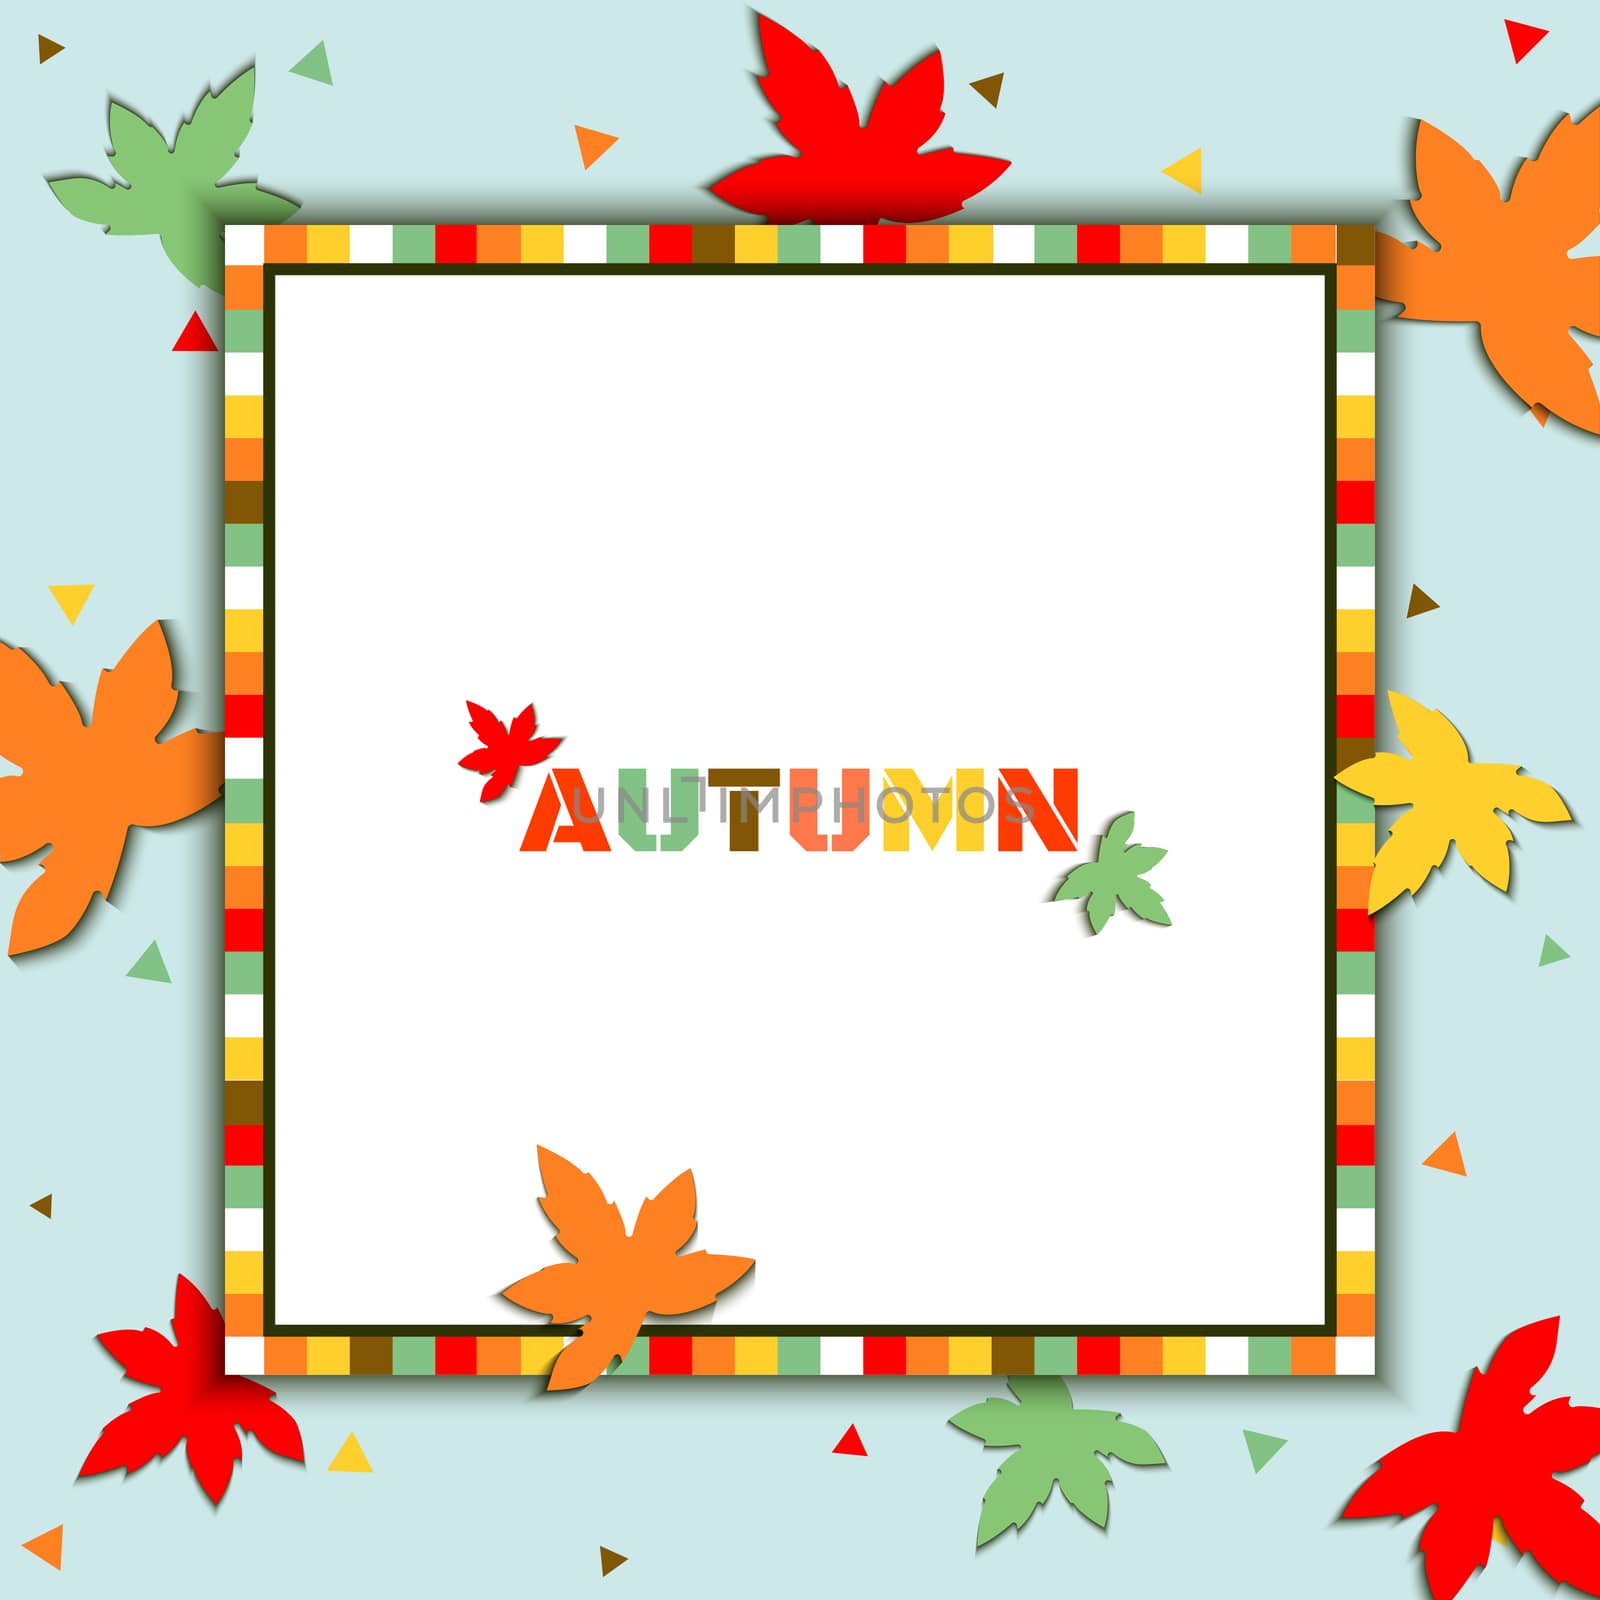 Illustration vector of Autumn season design with maple leaf and frame on blue background.